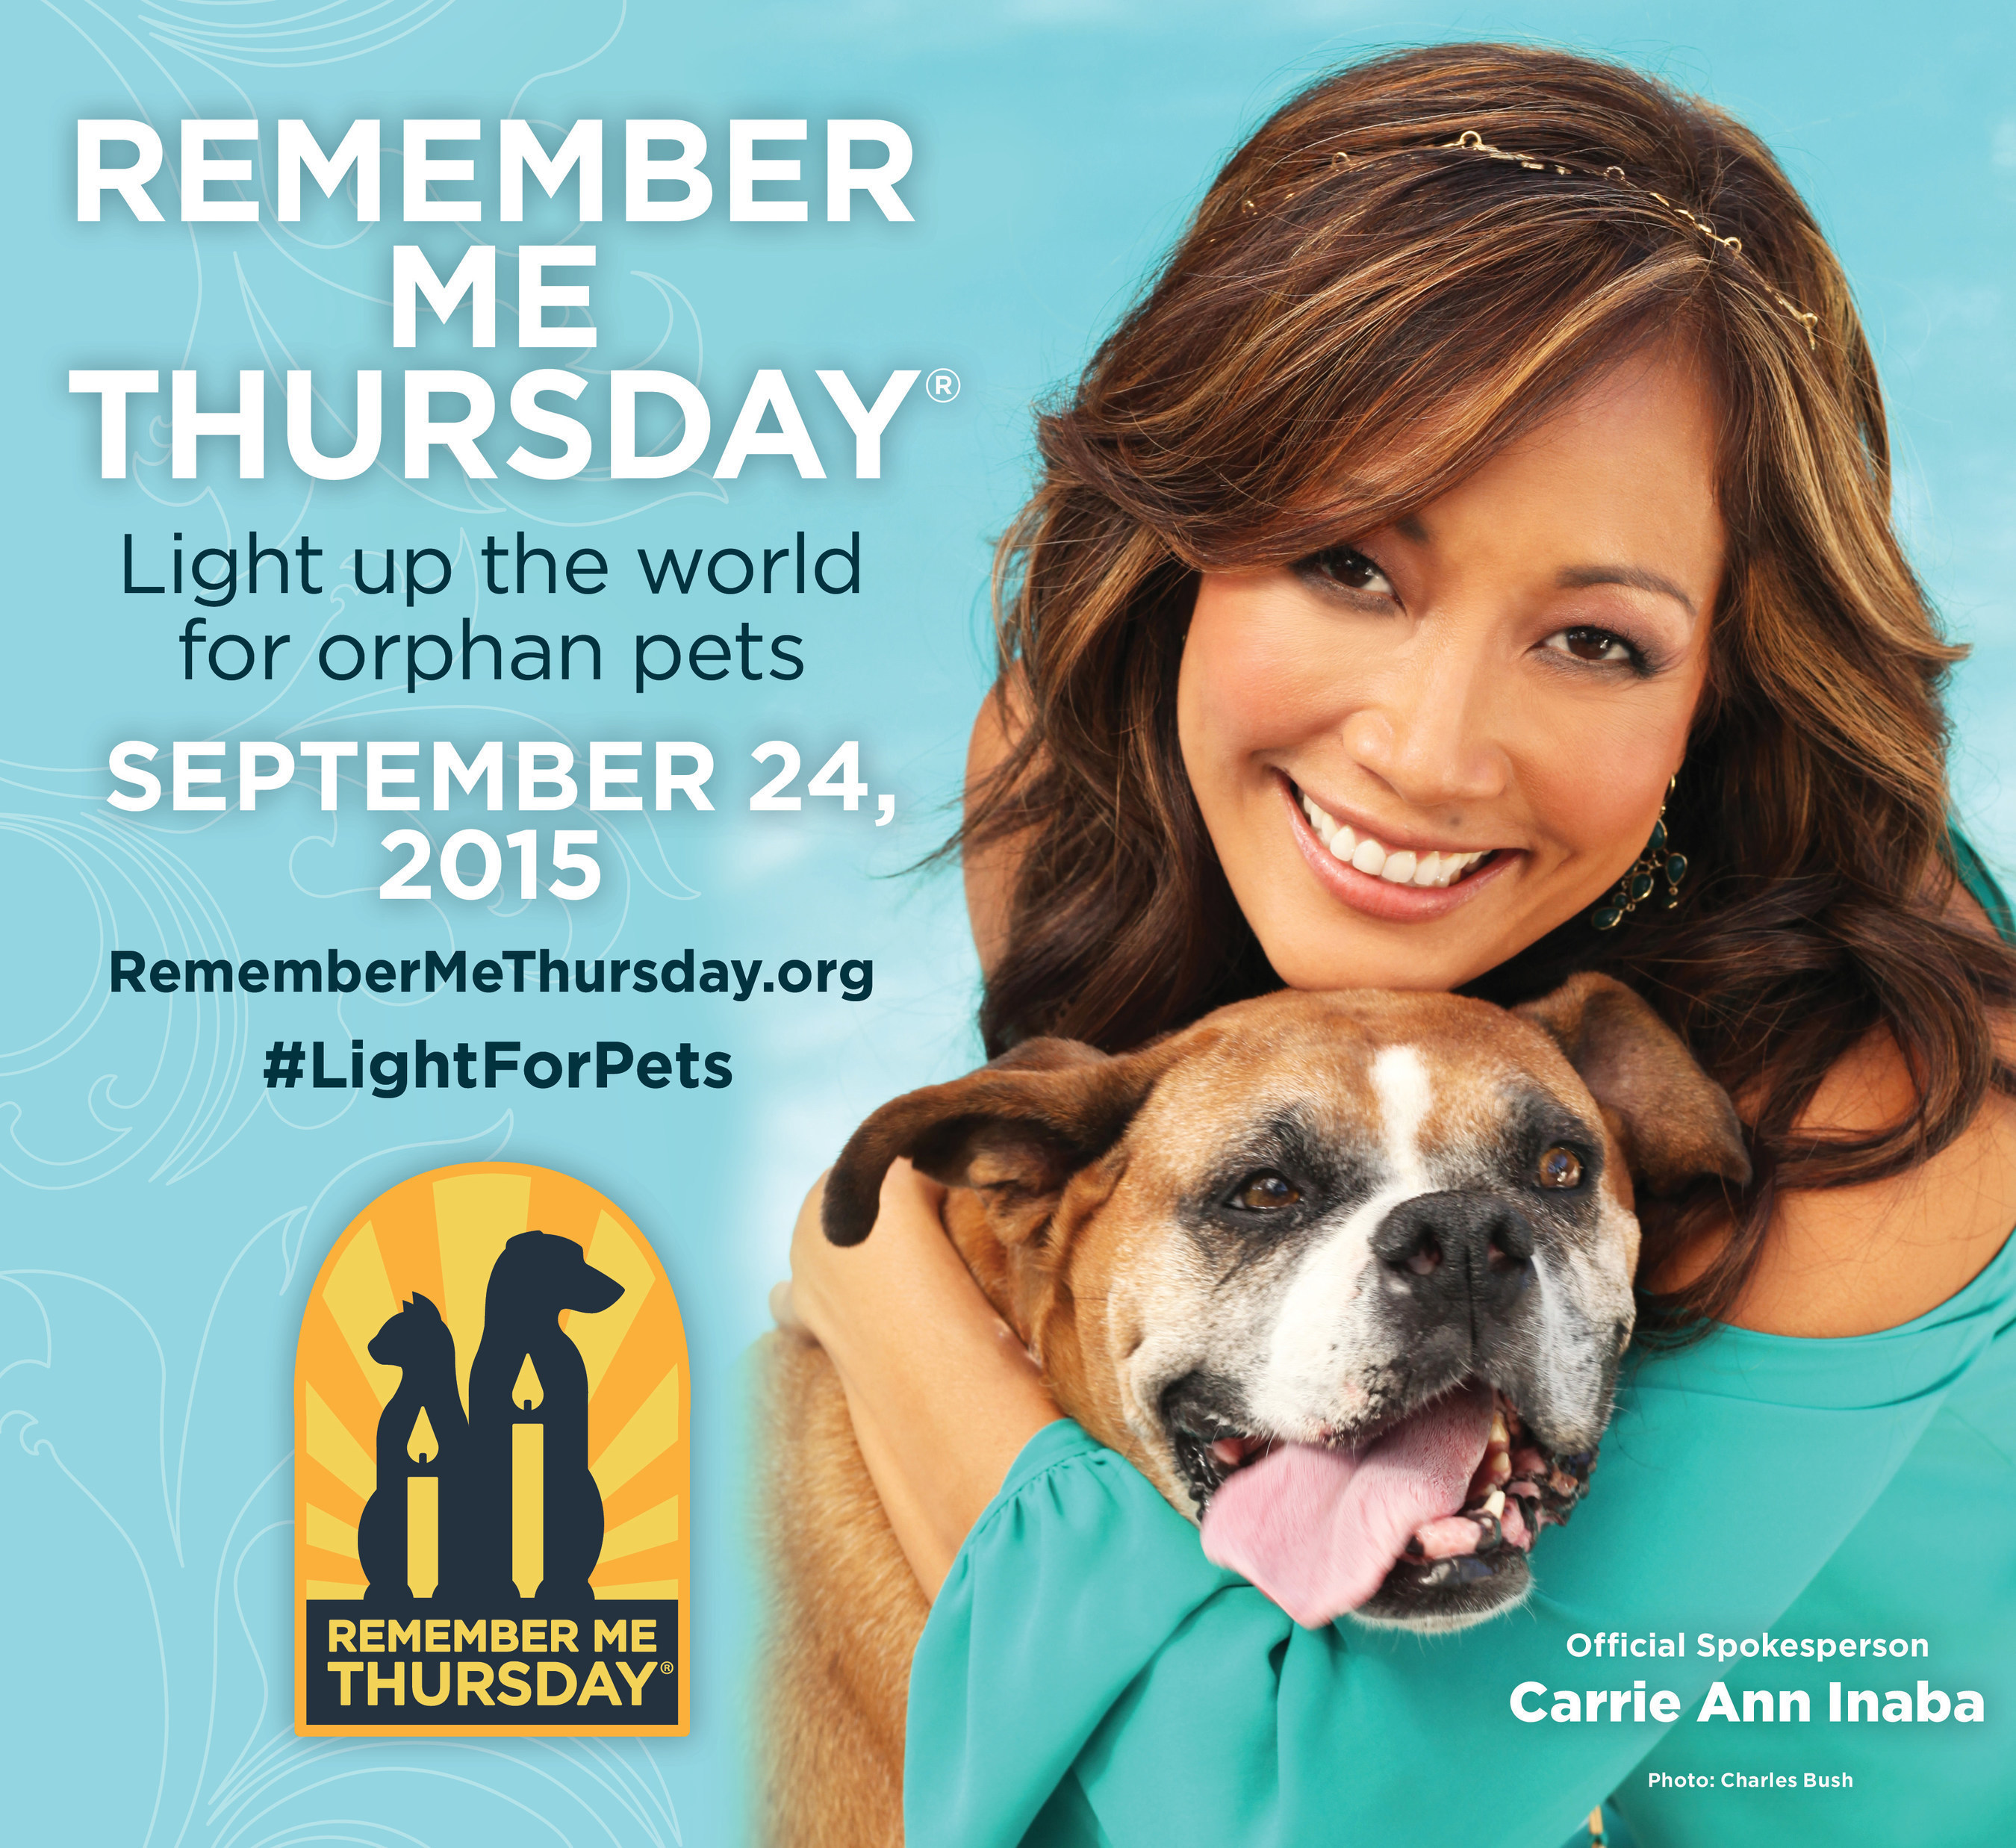 Remember Me Thursday(R) 2015 Official Spokesperson Carrie Ann Inaba with adopted dog, Cookie. Photo credit: Charles Bush